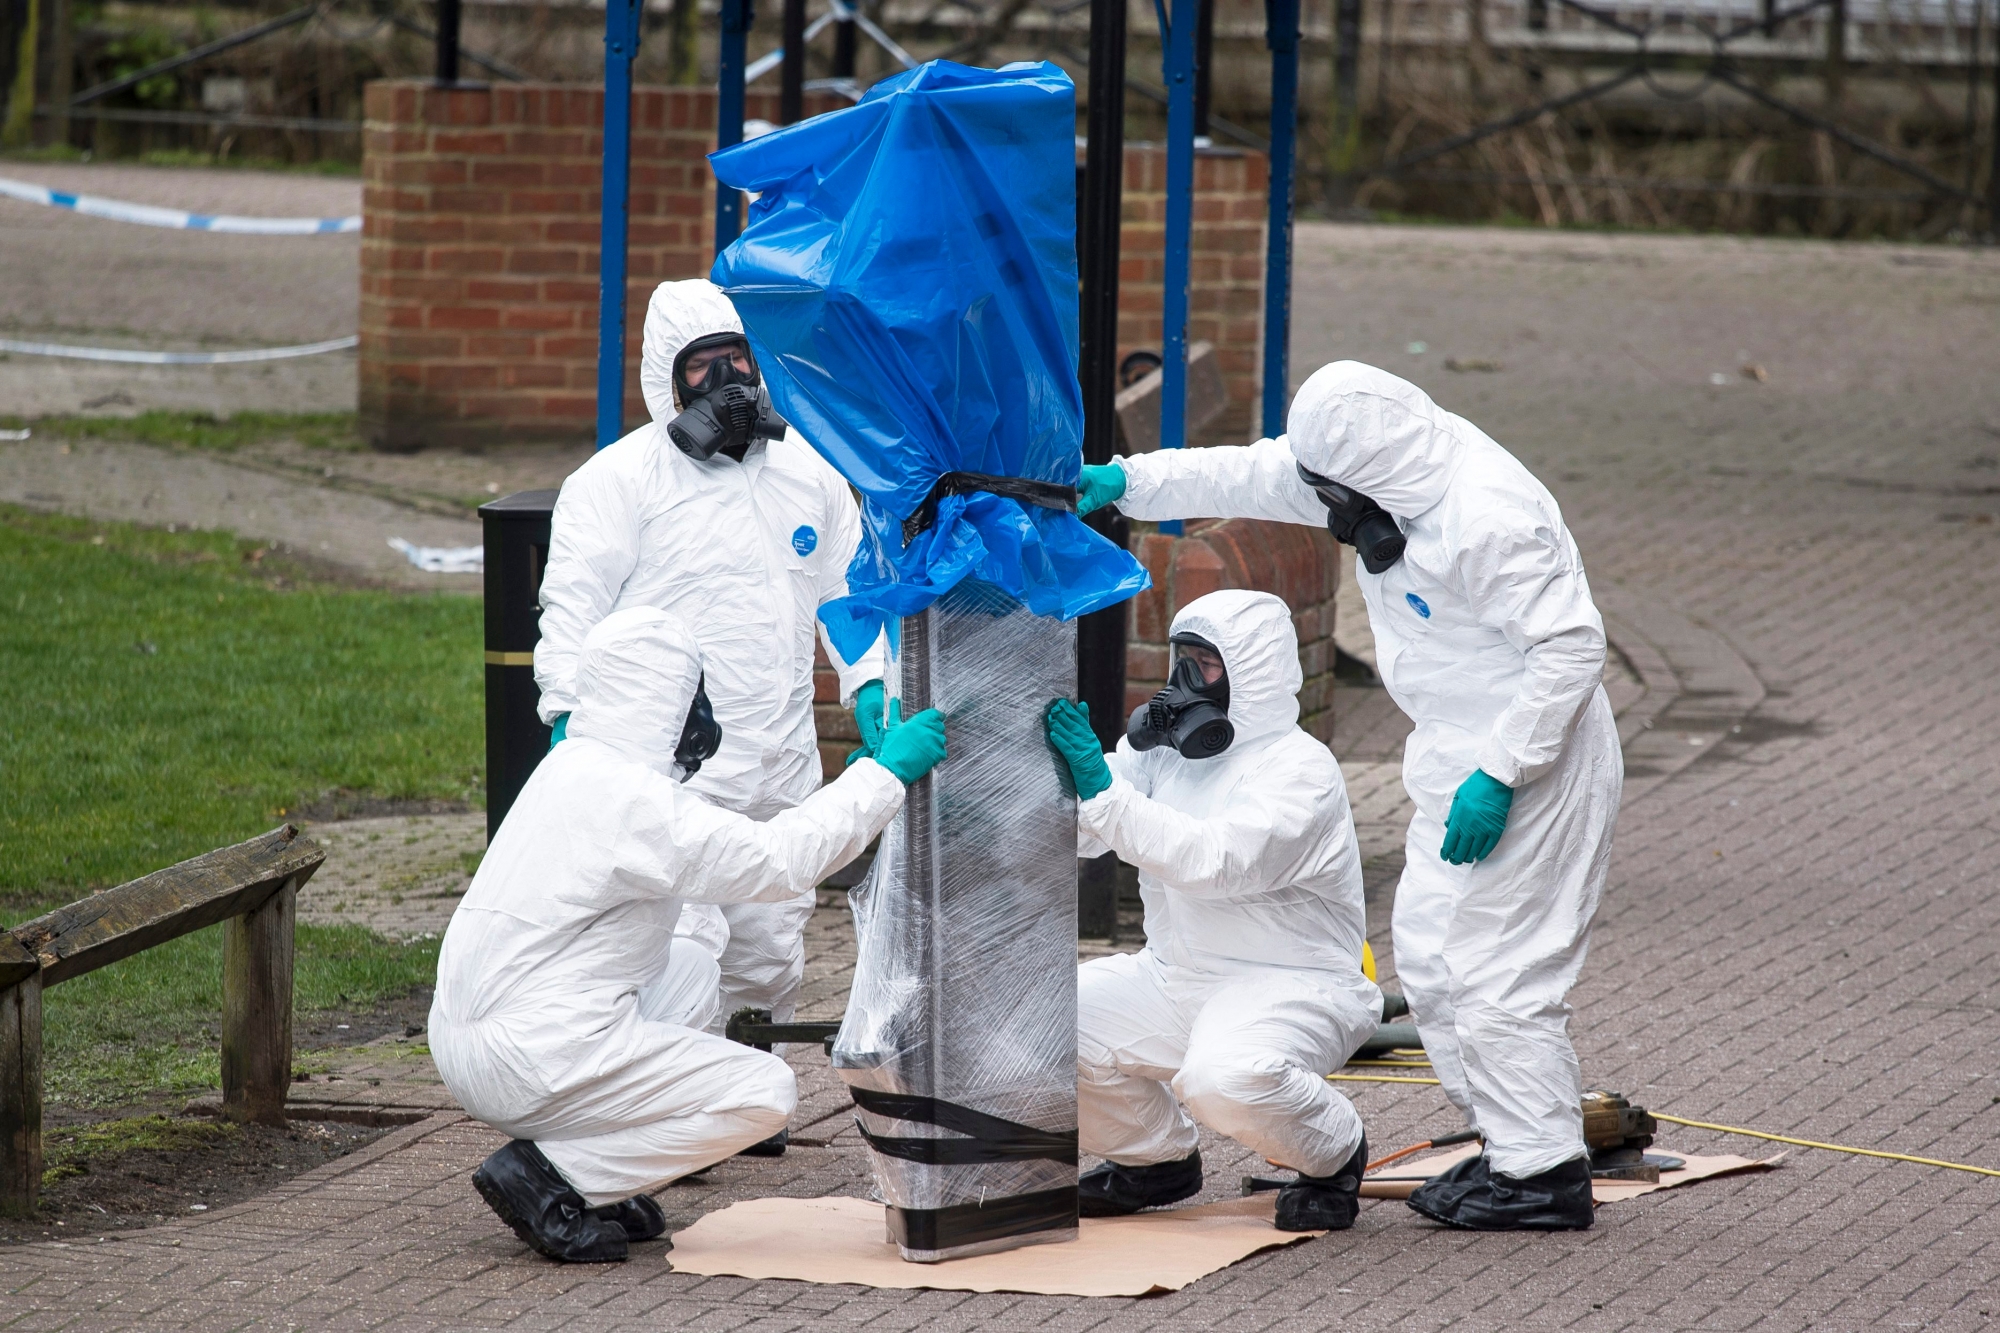 epa06897633 (FILE) - Army officers remove the bench, where Sergei Skripal and his daughter Yulia were found, in Salisbury, Wiltshire, Britain, 23 March 2018 (re-issued 19 July 2018). British media reports on 19 July 2018 state the British police have identified a number of Russians that they suspect of being behind the attack in March where Novichok nerve agent was used against former Russian spy Sergei Skripal and his daughter Yulia.  EPA/WILL OLIVER (FILE) BRITAIN CRIME NERVE AGENT ATTACK